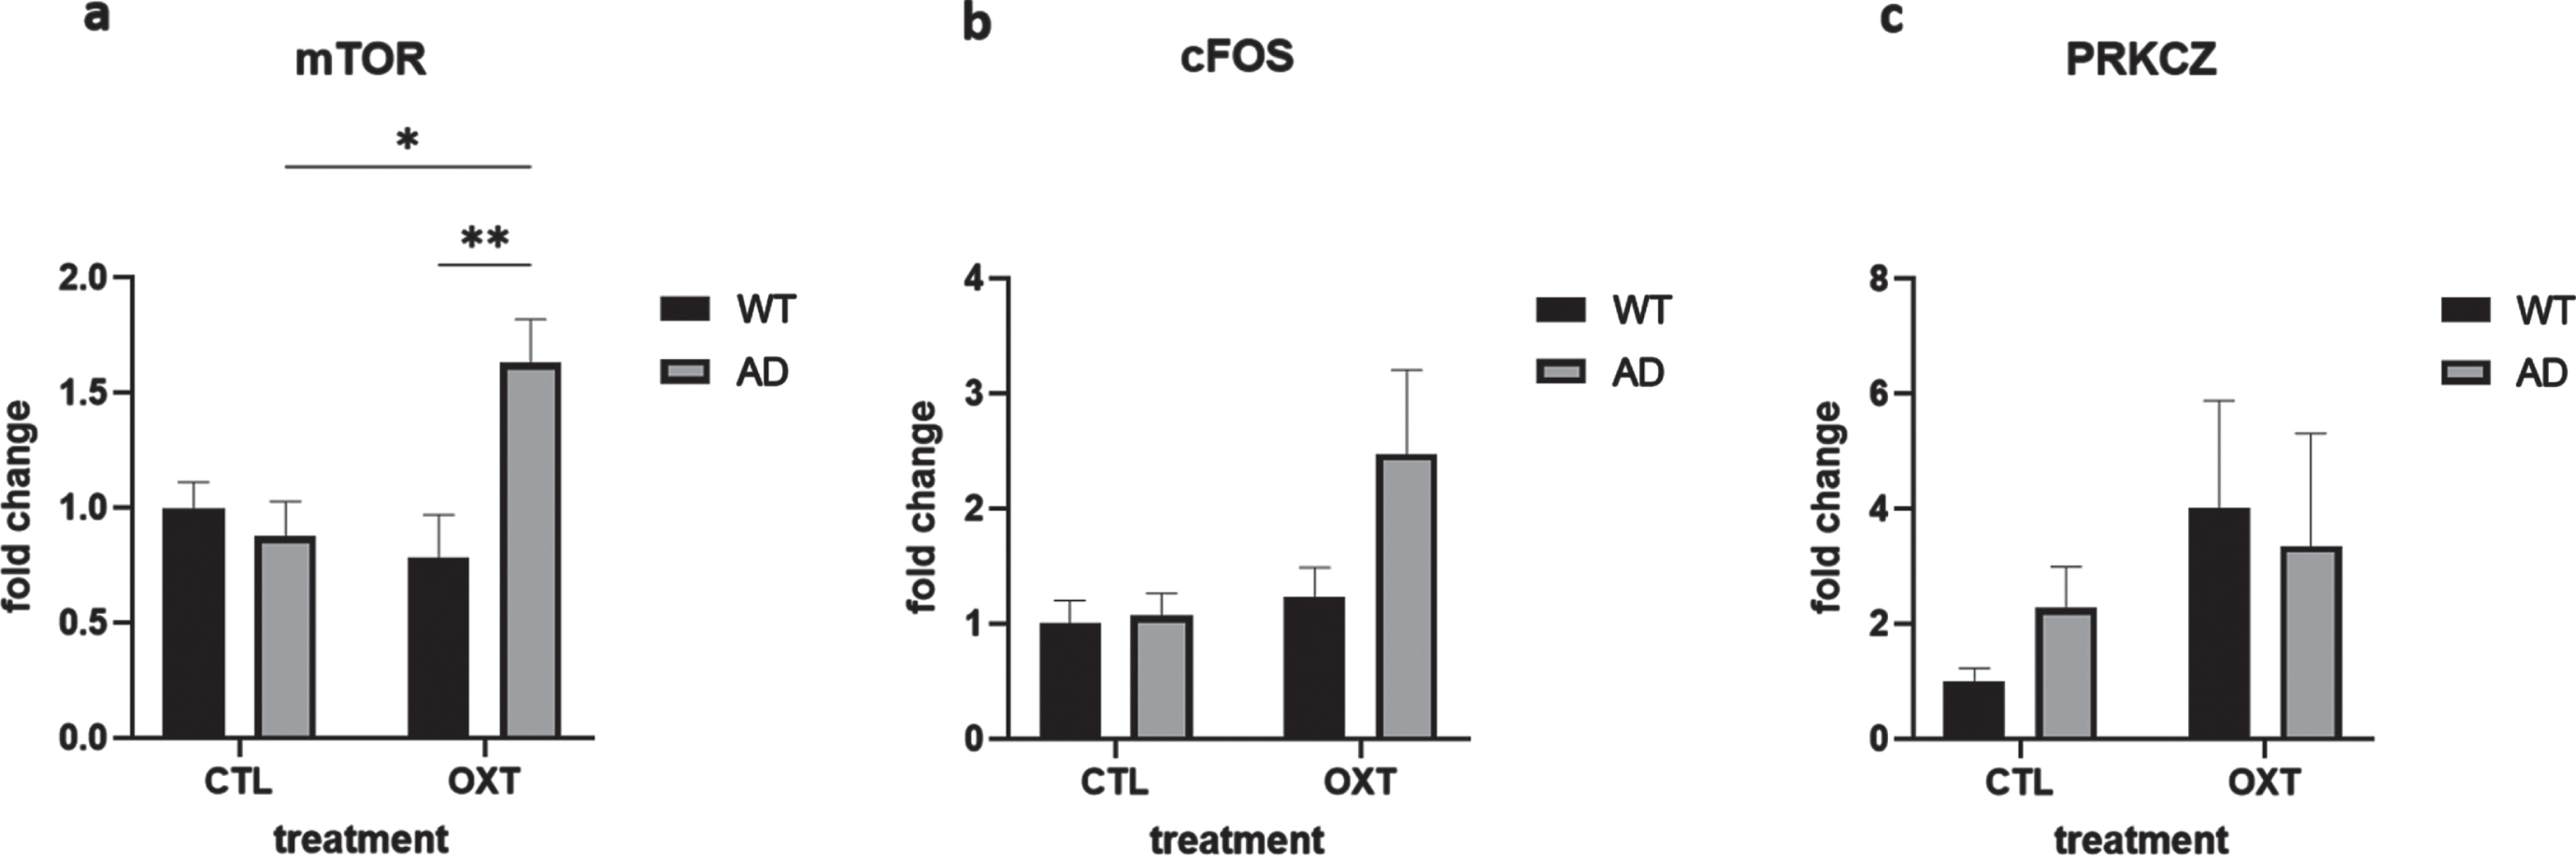 Intranasal administration of oxytocin in an AD model increases expression of mTOR. The expression of several mediators in the oxytocin-OXTR pathway was measured in hippocampal tissue isolated from oxytocin- or vehicle-treated AD and wild type mice after 42 days of treatment. Expression was normalized using GAPDH and HPRT1 and converted to fold change values (as compared to WT control animals). Expression of mTOR was upregulated in the AD group that received oxytocin (n = 8) compared to the AD control group (a) (n = 8) (two-way ANOVA with Tukey post-hoc analysis). Expression of cFOS and PRKCZ was not significantly different in any condition (b, c). Bars represent mean±SEM. mTOR, mammalian target of rapamycin; PKMζ, protein kinase M ζ; AD, Alzheimer’s disease; OXTR, oxytocin receptor; GAPDH, glyceraldehyde-3-phosphate dehydrogenase. **p < 0.005, *p < 0.05.